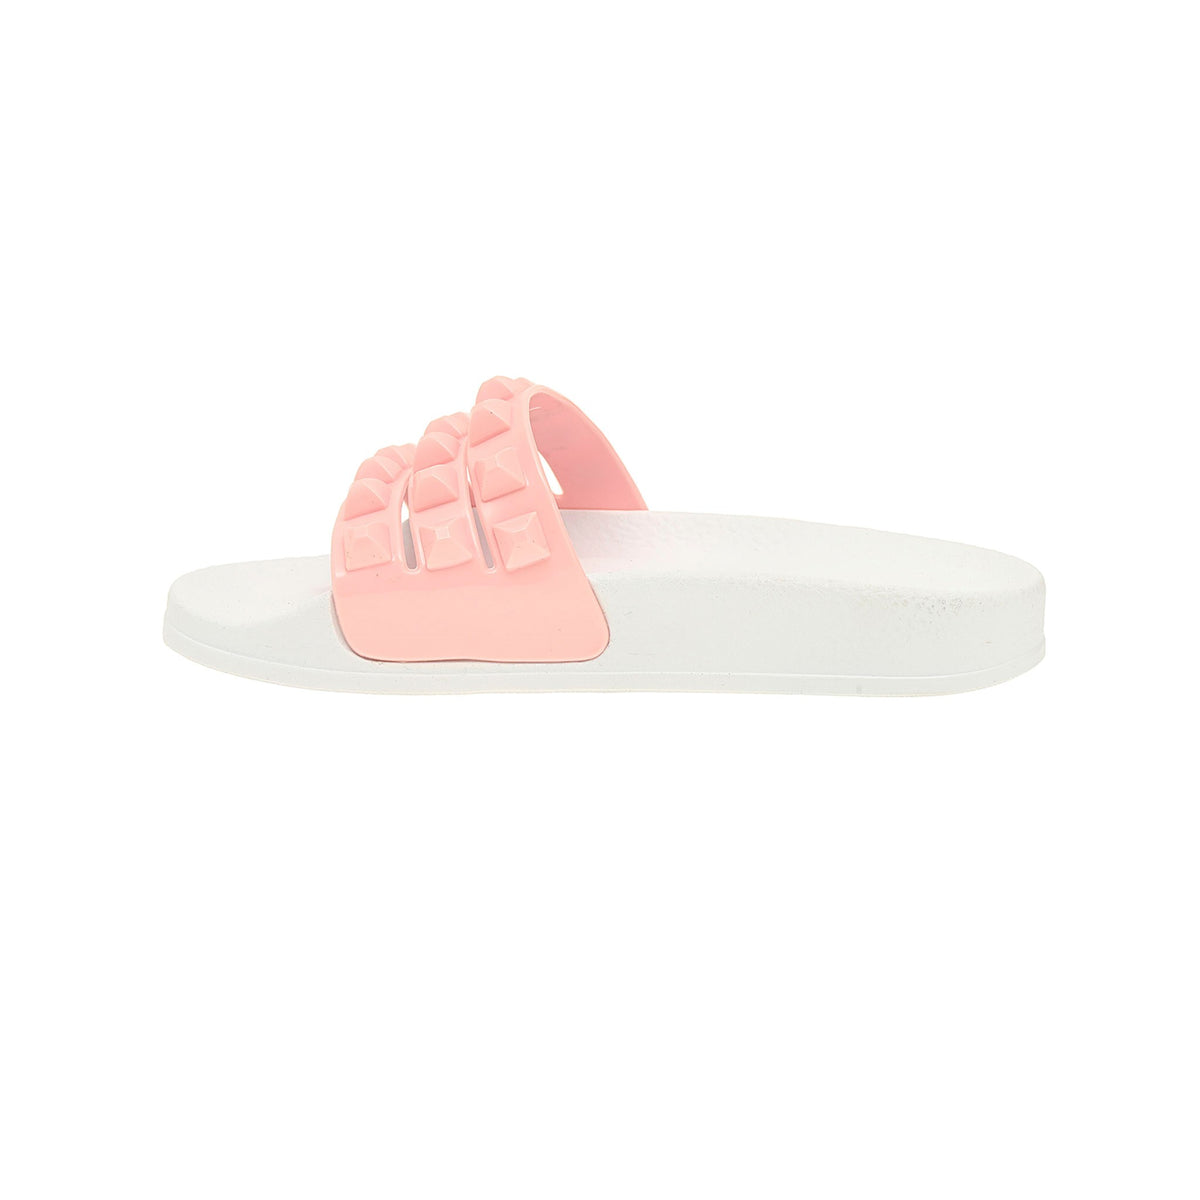 Baby pink kids jelly sandals, attractive white toddler sandals, beach slides from minicarmen sol.